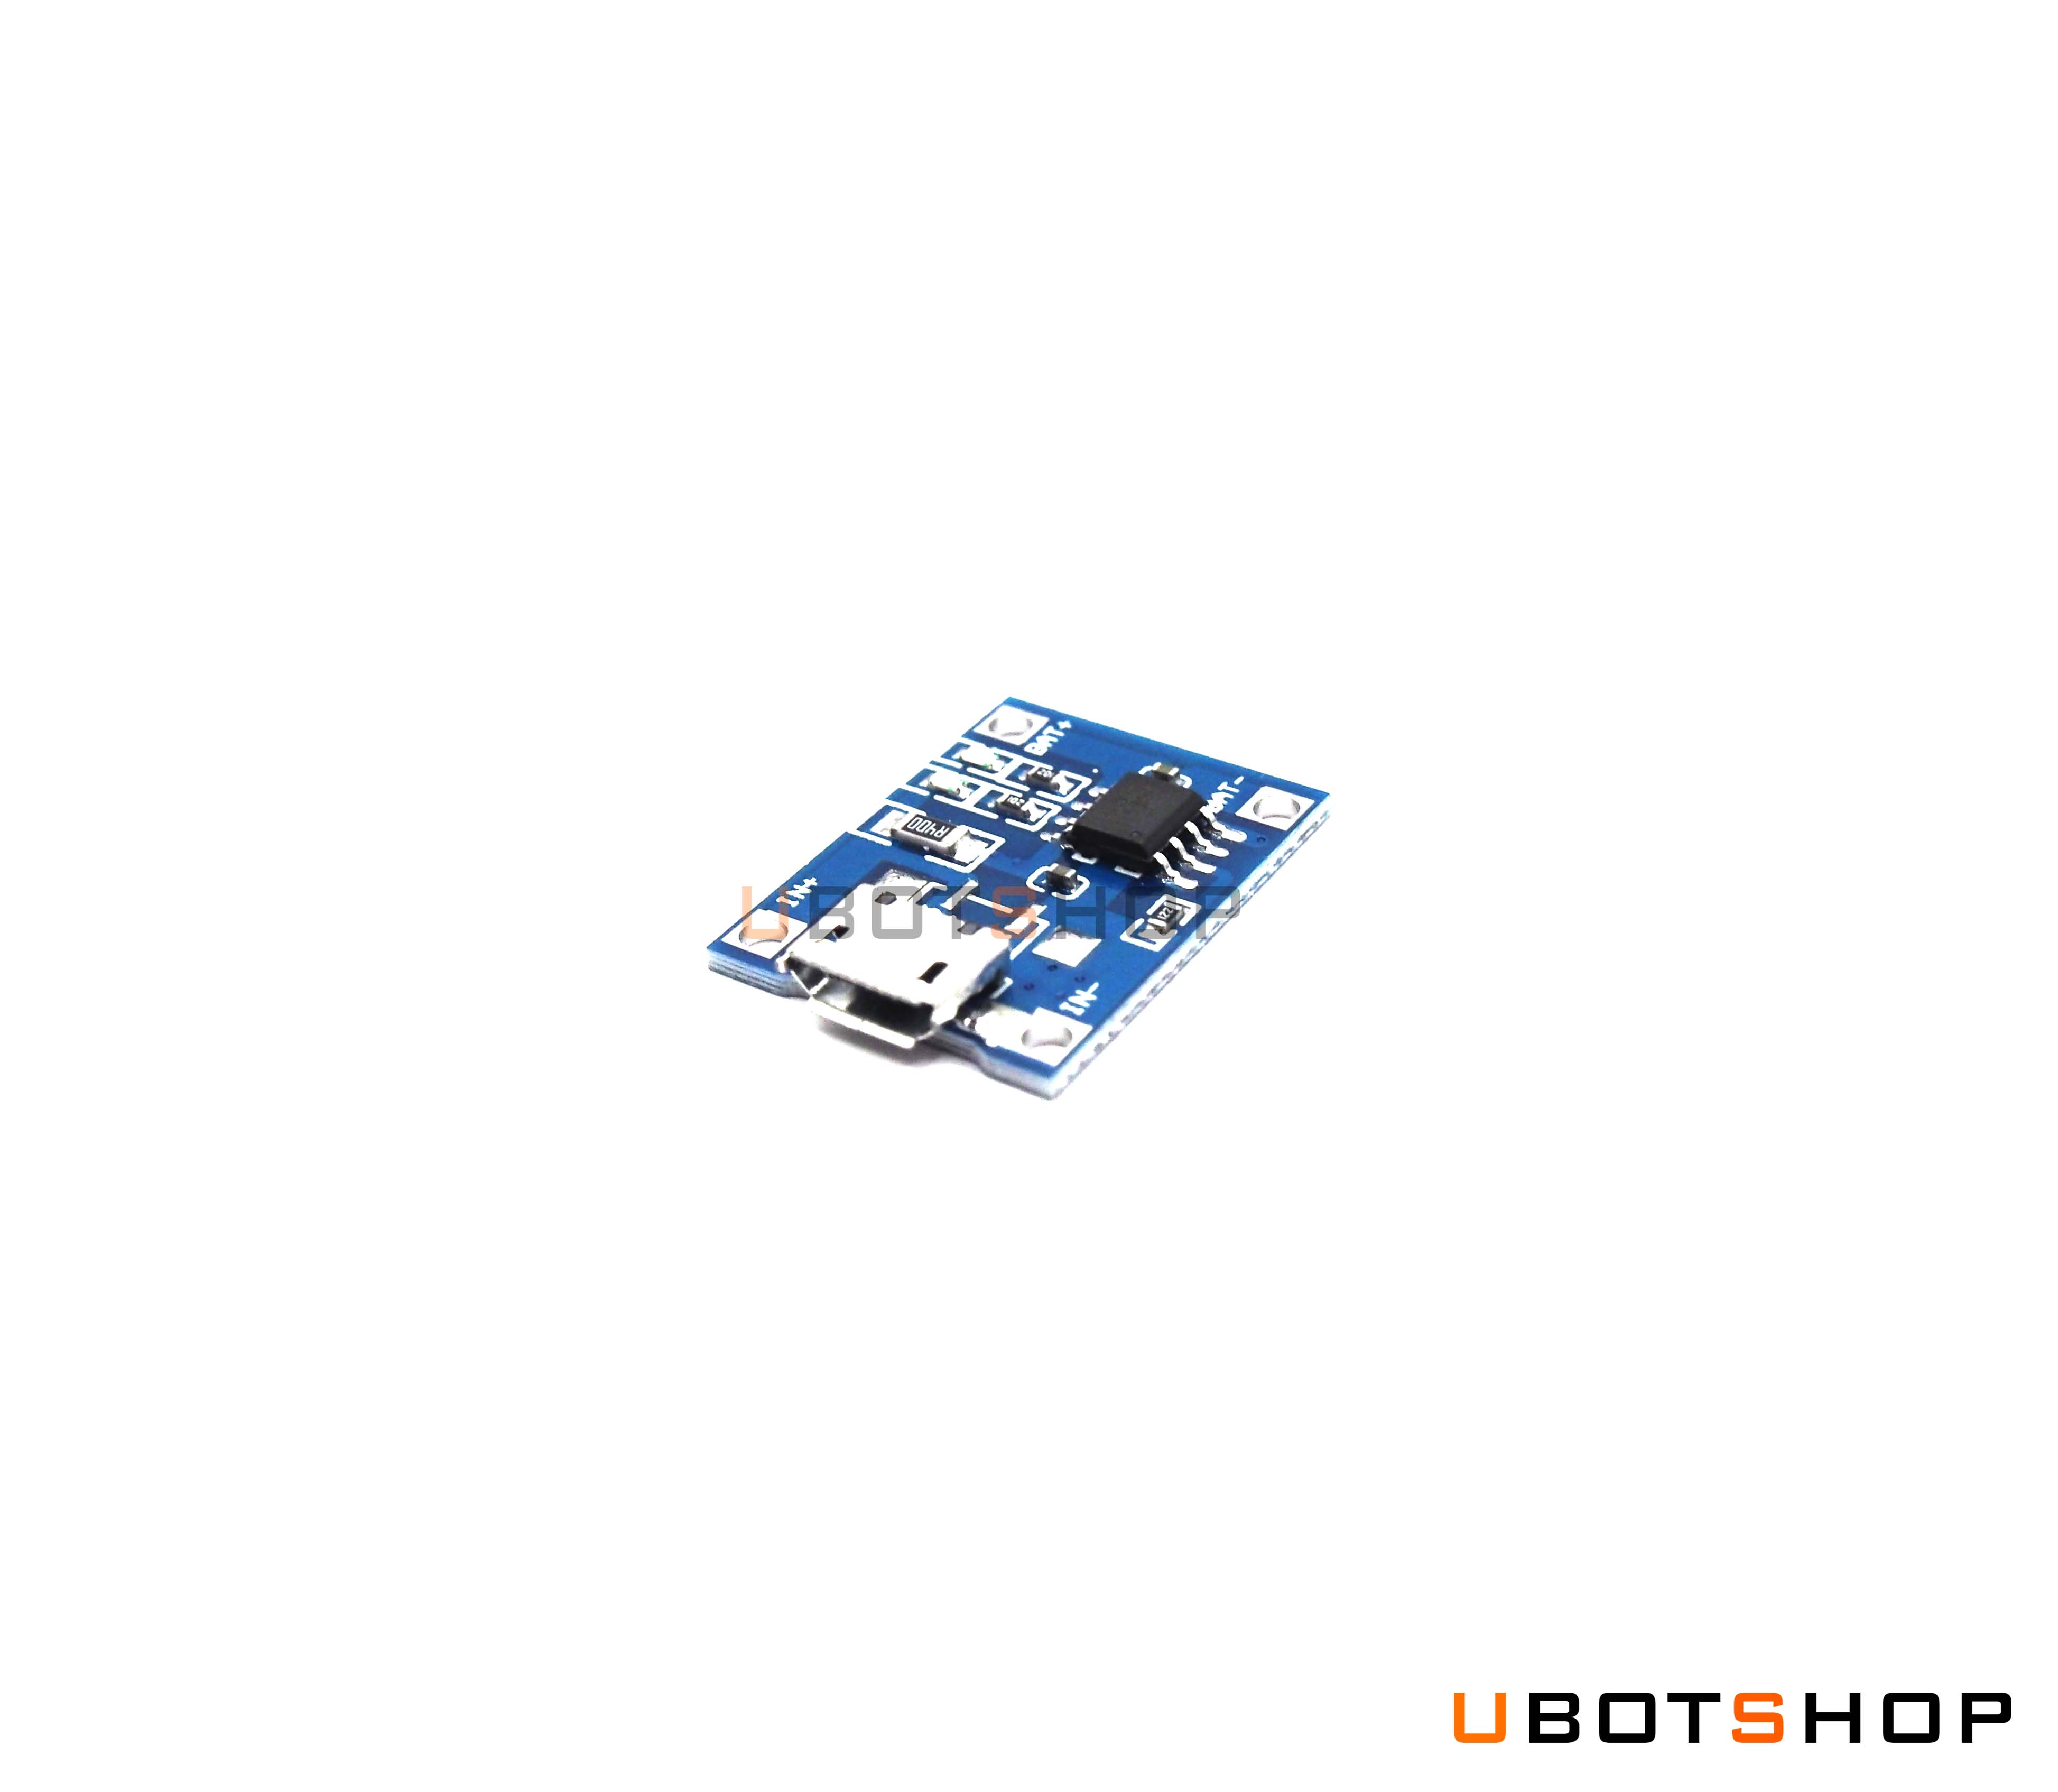 Lithium Battery Charger Module (PB0003)